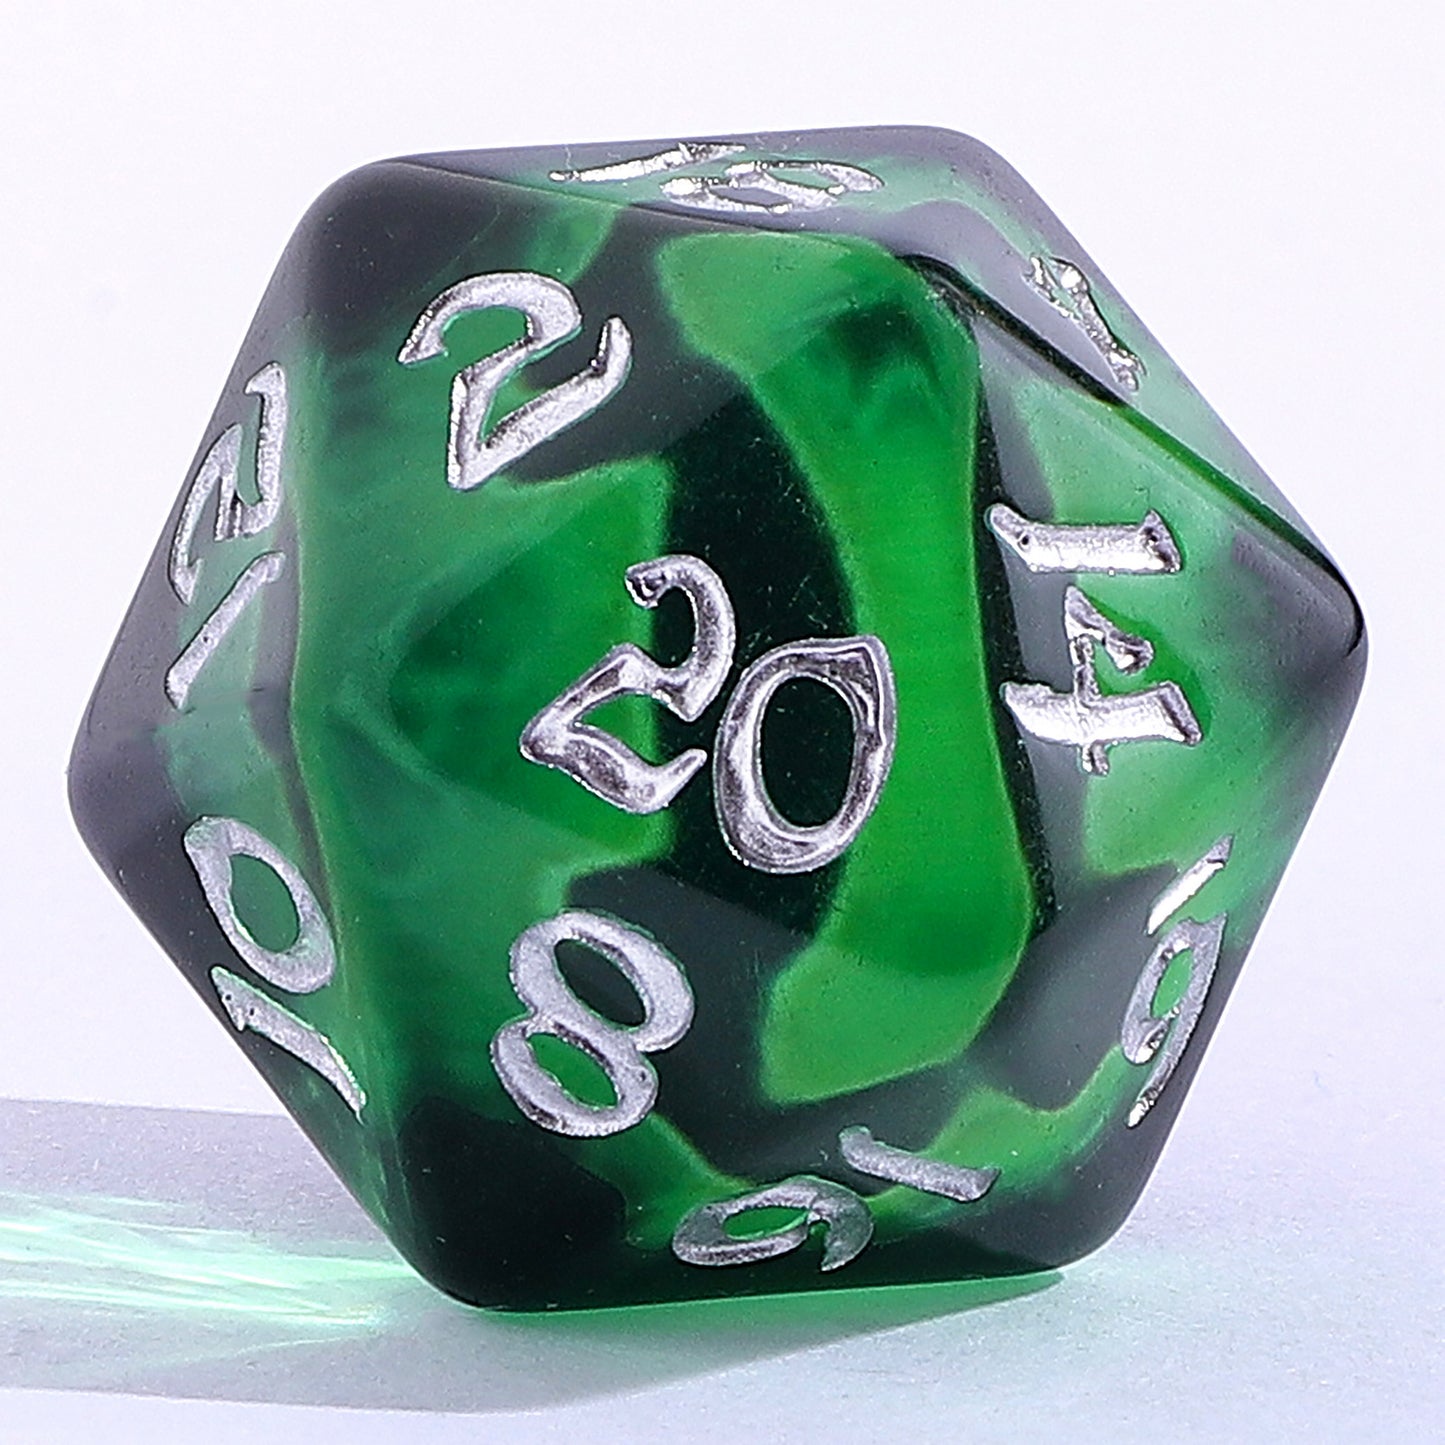 Wyrmforged Rollers Rounded Edge Resin Dragon's Eye Dice Set-Green